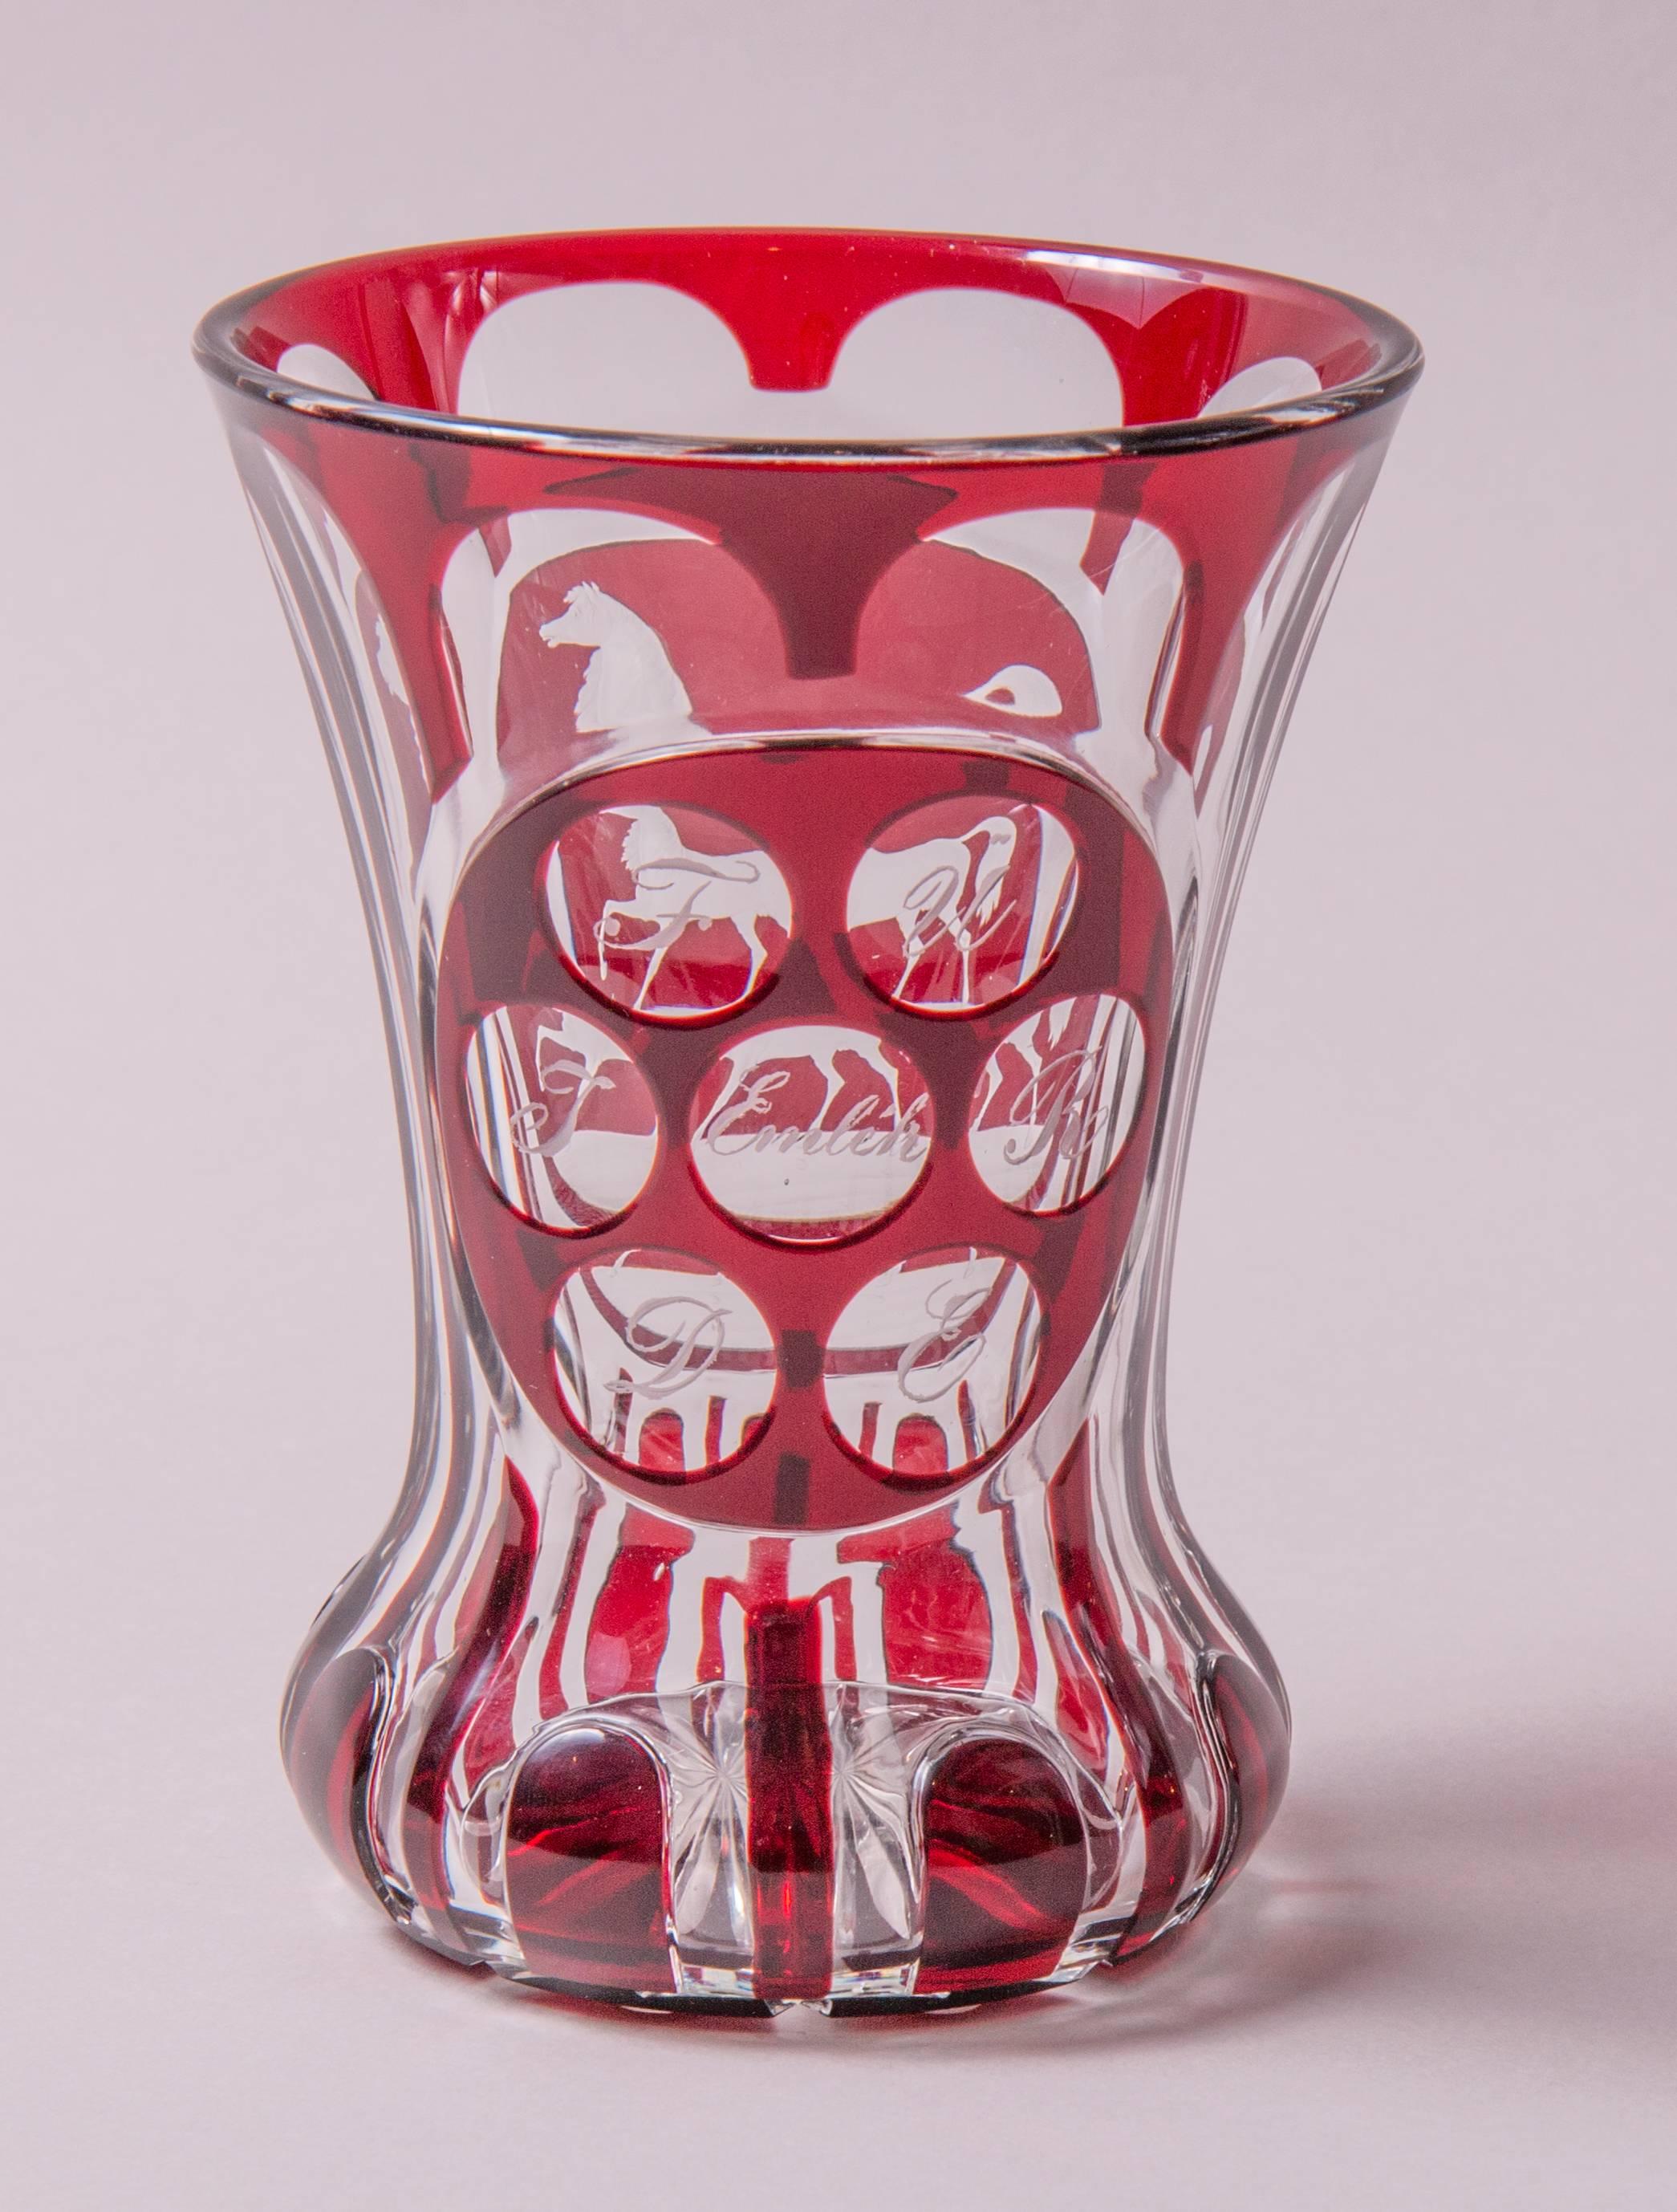 attributed to Karl Pfohl (1826–1894)
Harrach’sche Hütte Neuwelt, Steinschönau, North Bohemia 
Colourless glass with red overlay, the facing side with cut image of a horse, the reverse side with seven cut lenses with dedication: „FÜR EDJ